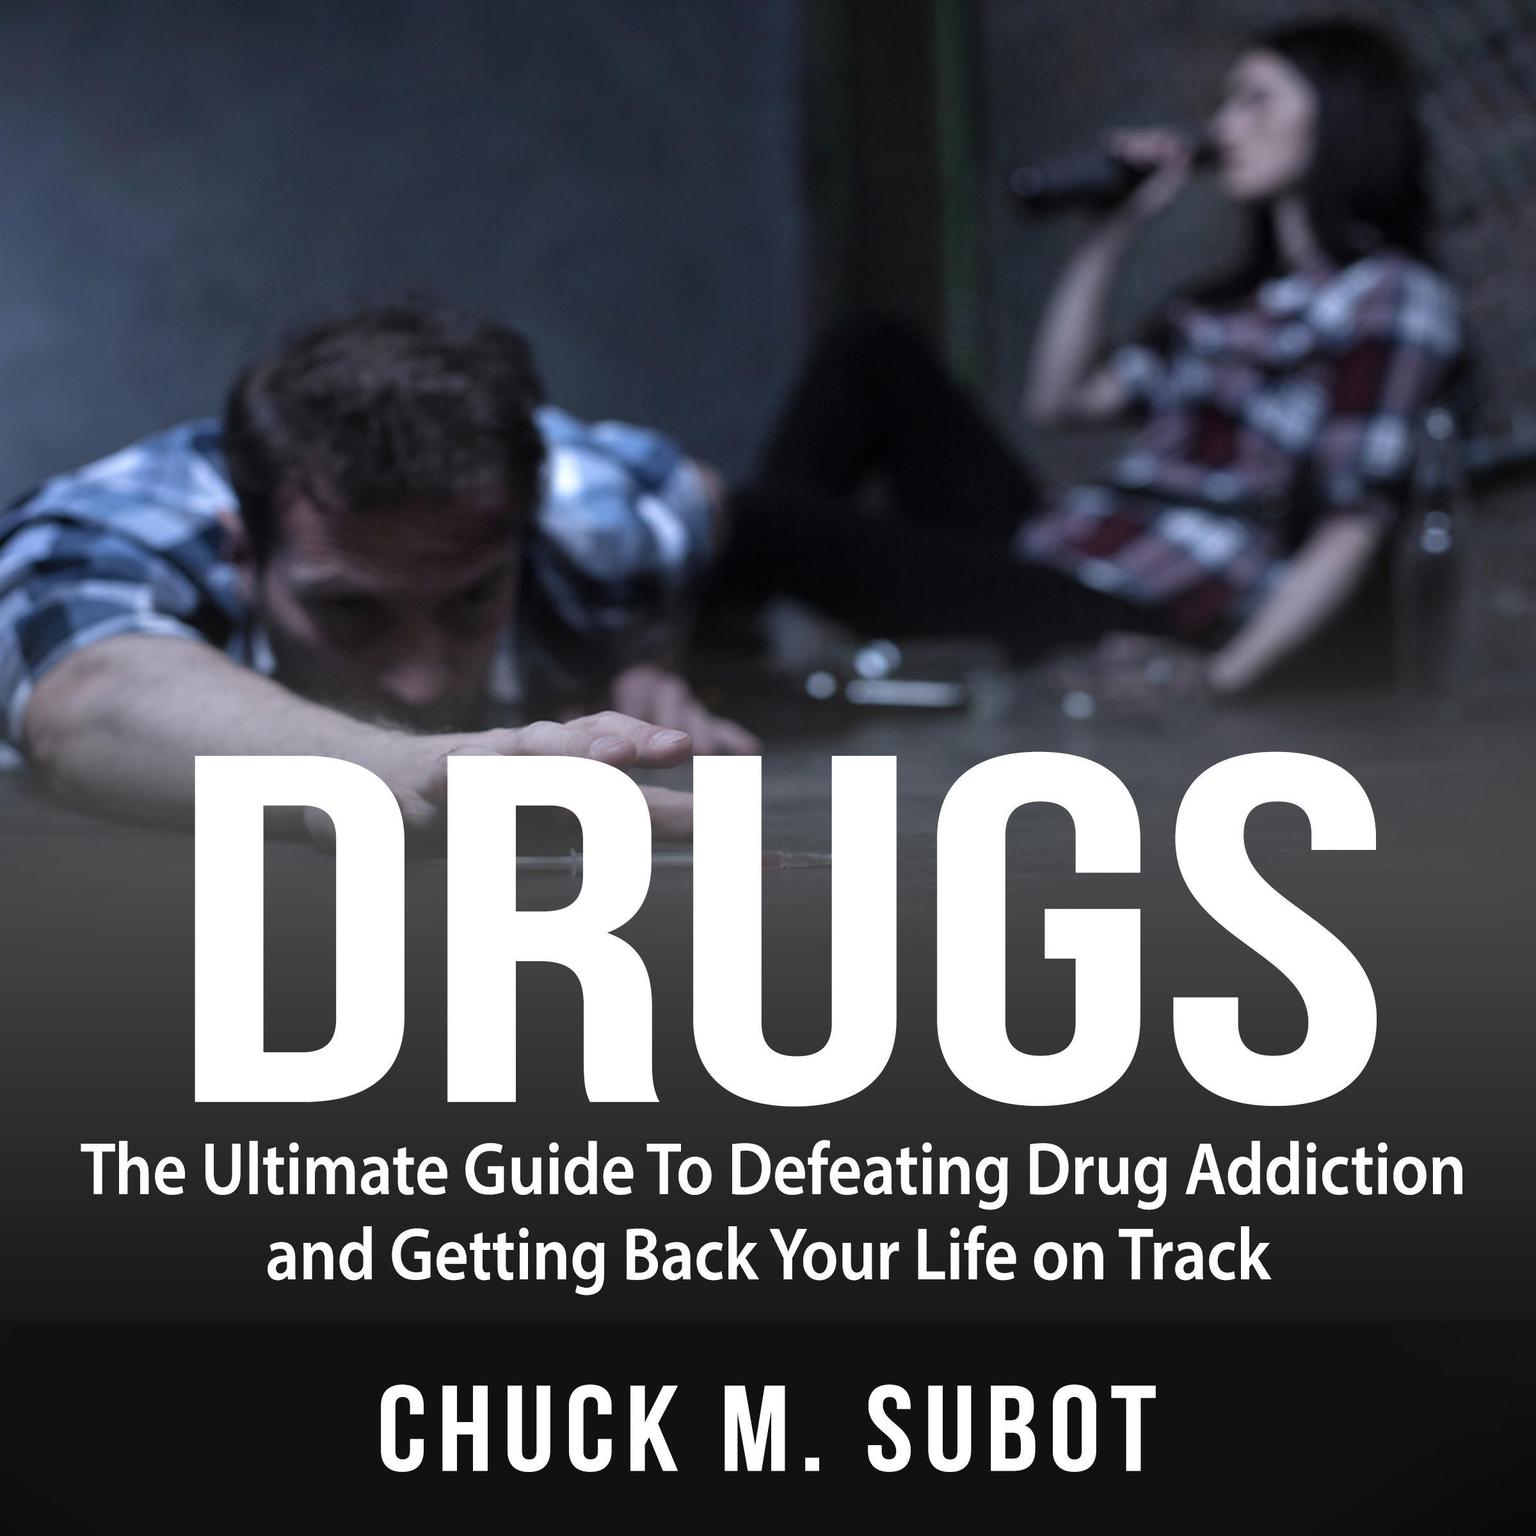 Drugs: The Ultimate Guide To Defeating Drug Addiction and Getting Back Your Life on Track Audiobook, by Chuck M. Subot